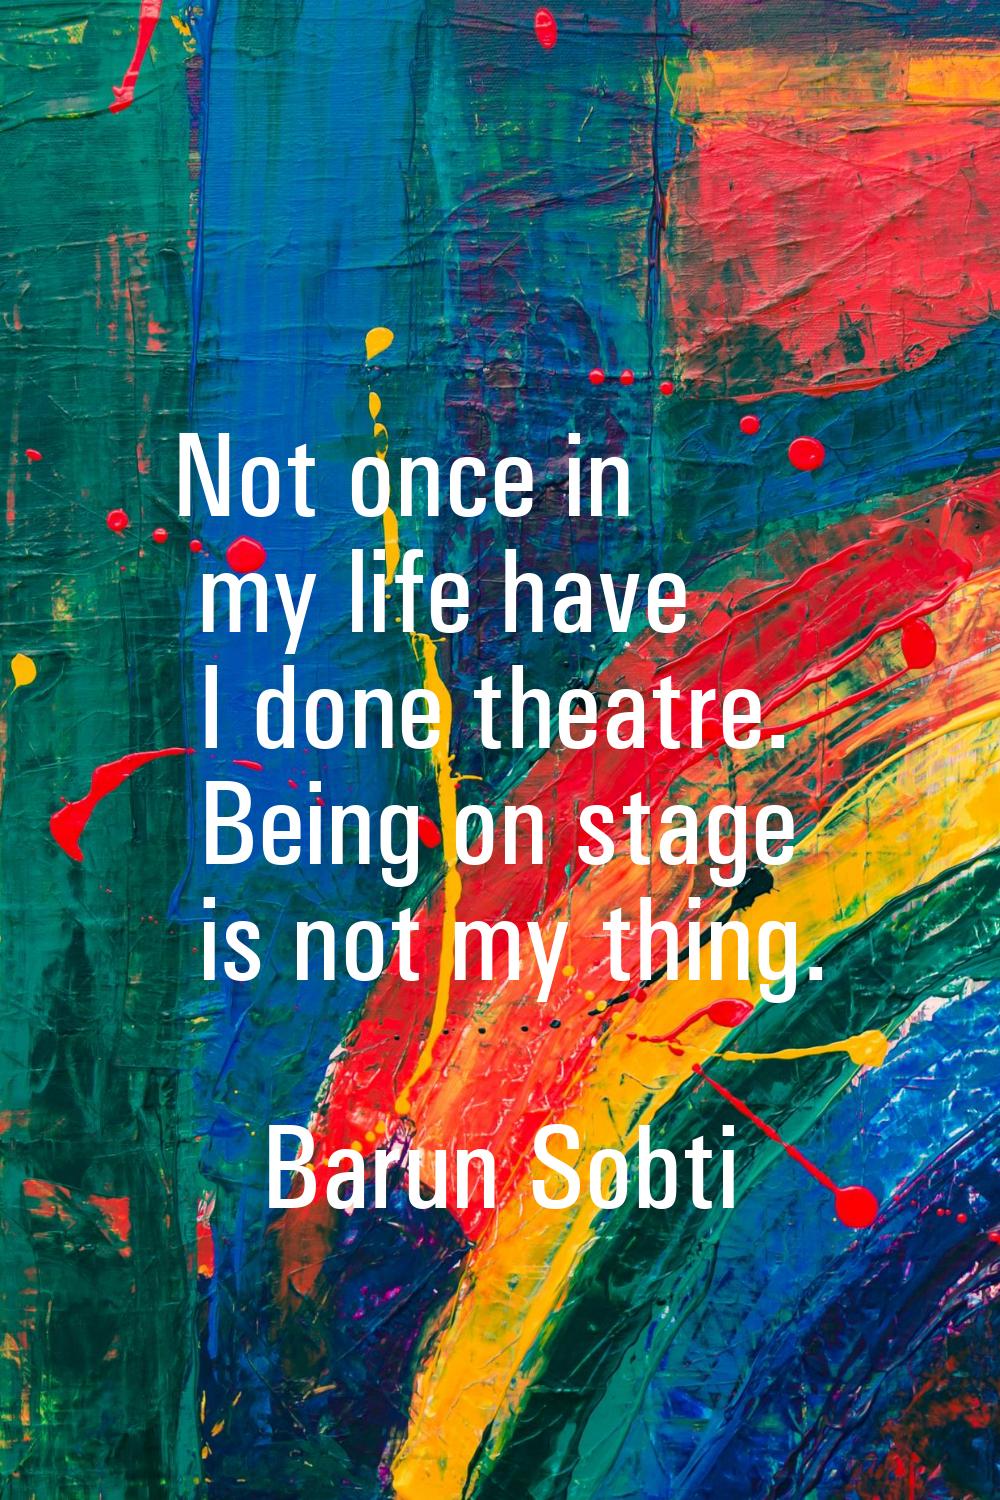 Not once in my life have I done theatre. Being on stage is not my thing.